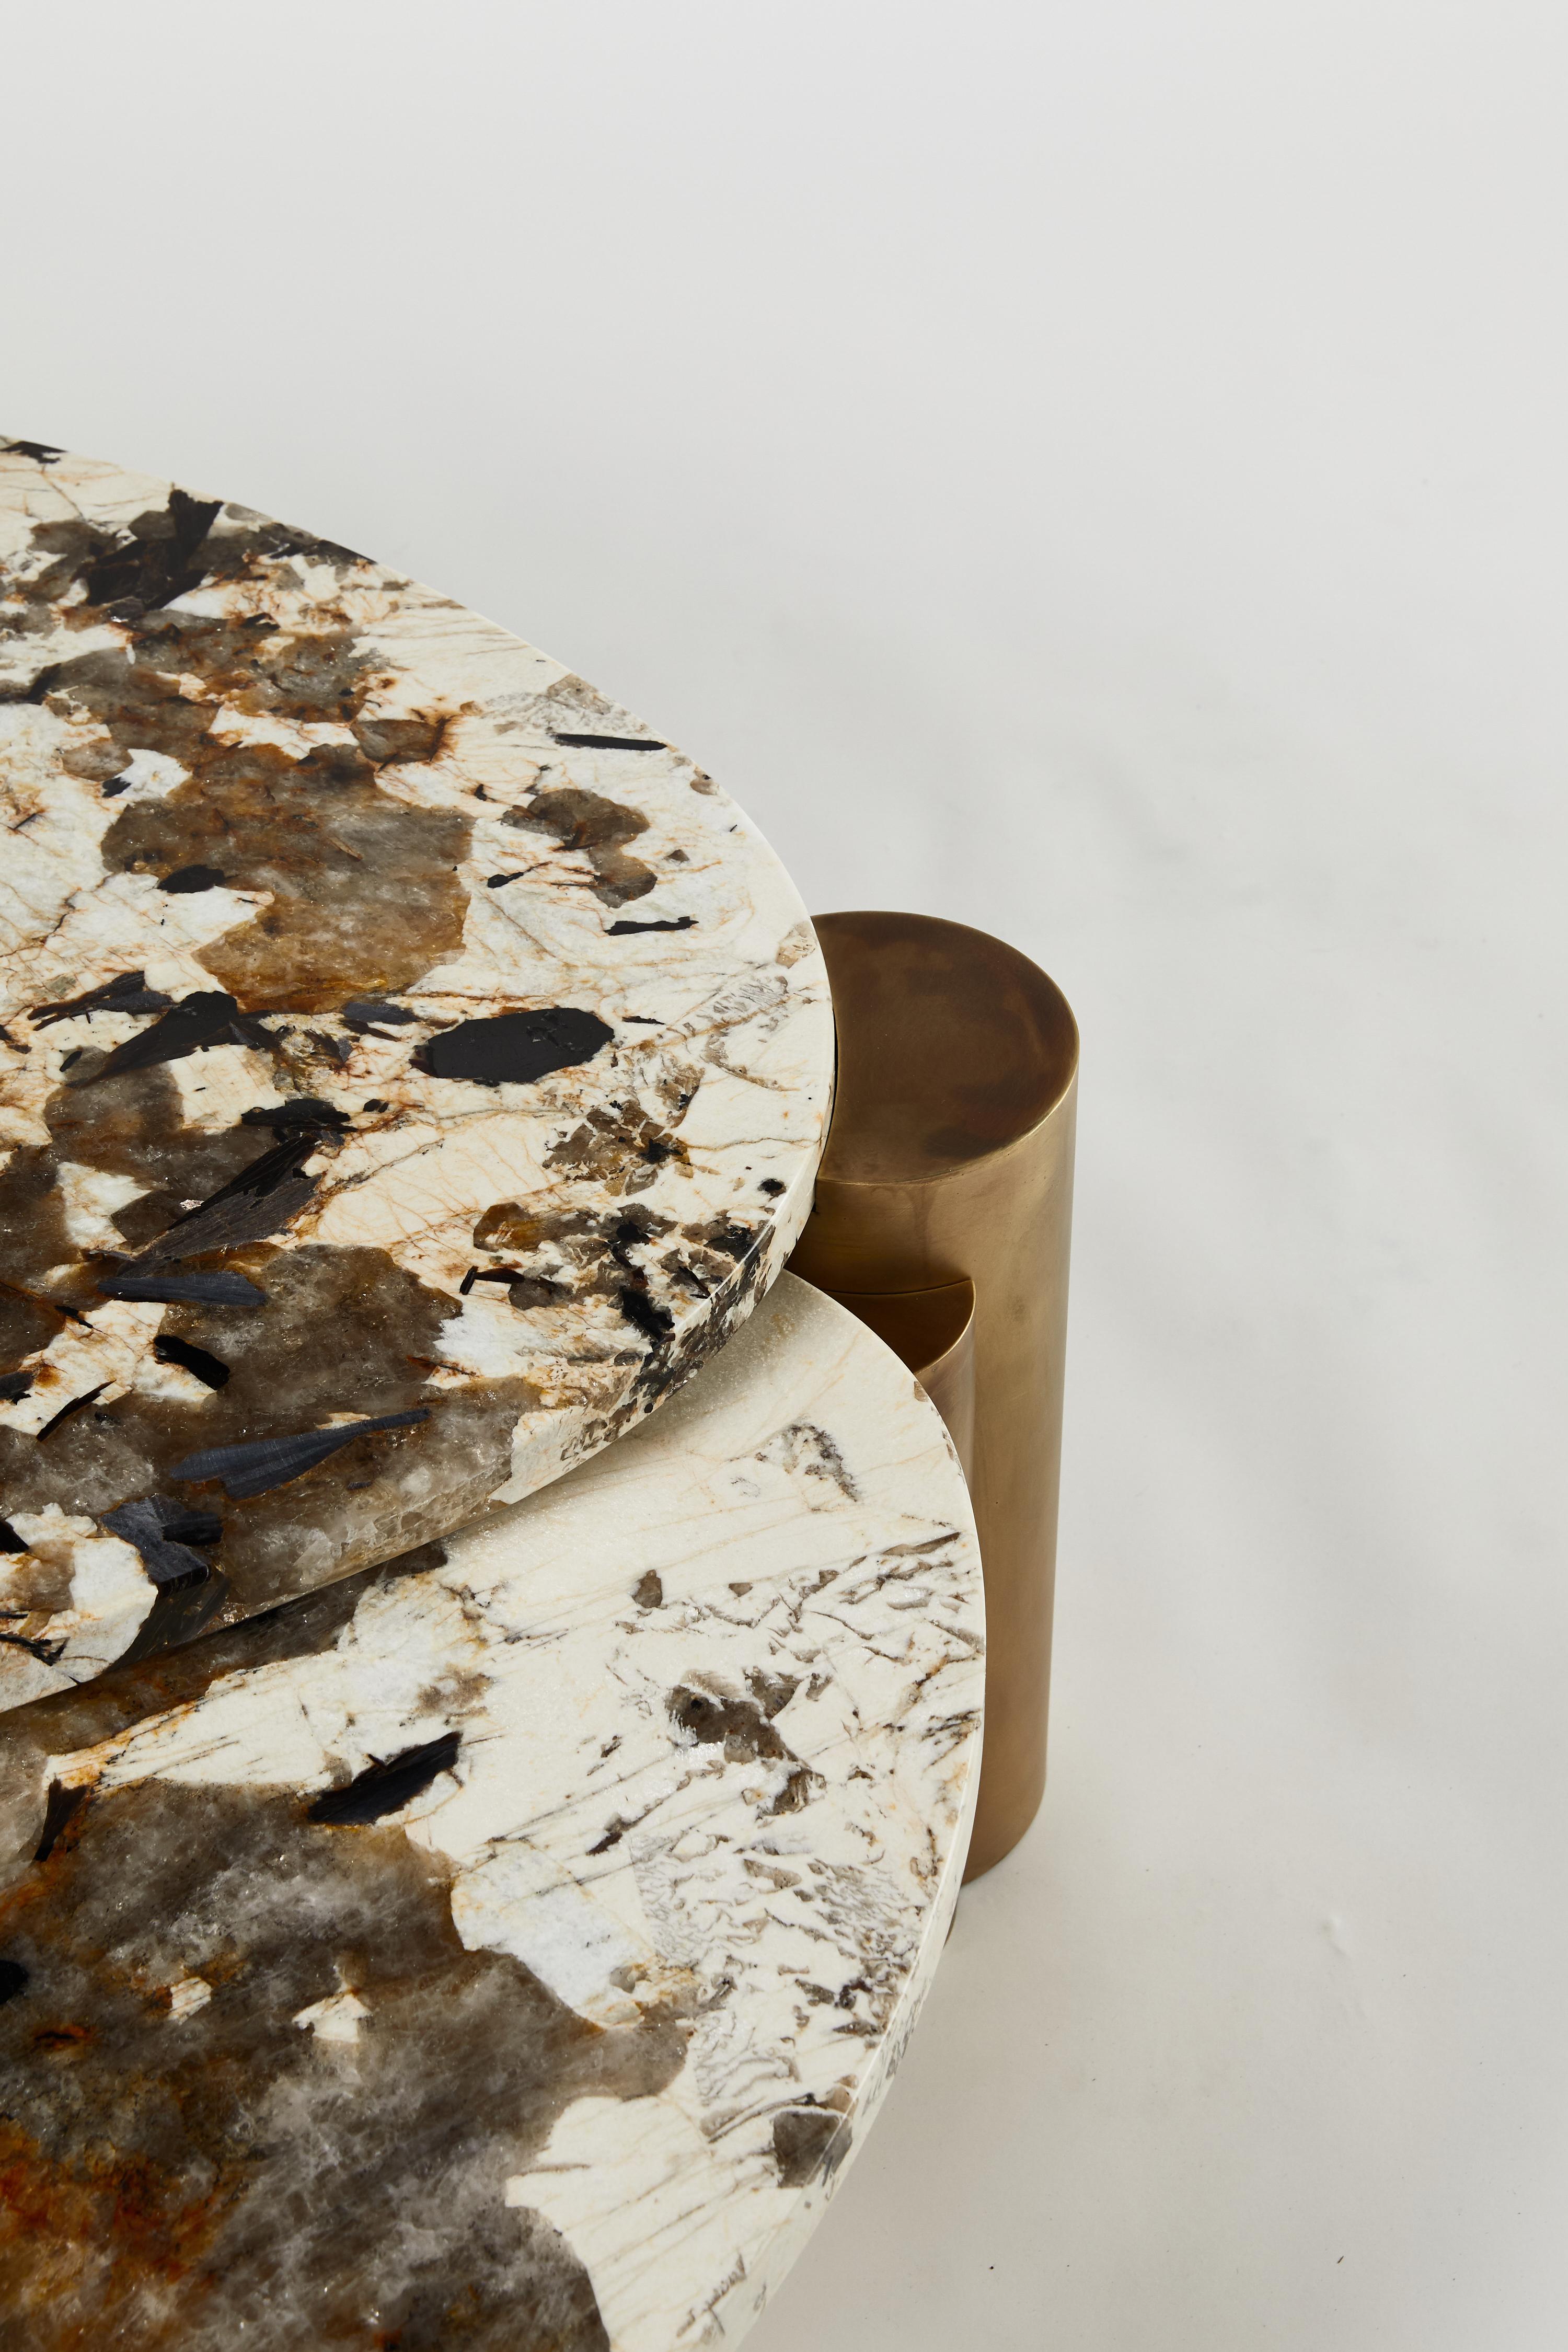 Contemporary Patagonia Xenolith Table by Ben Barber Studio